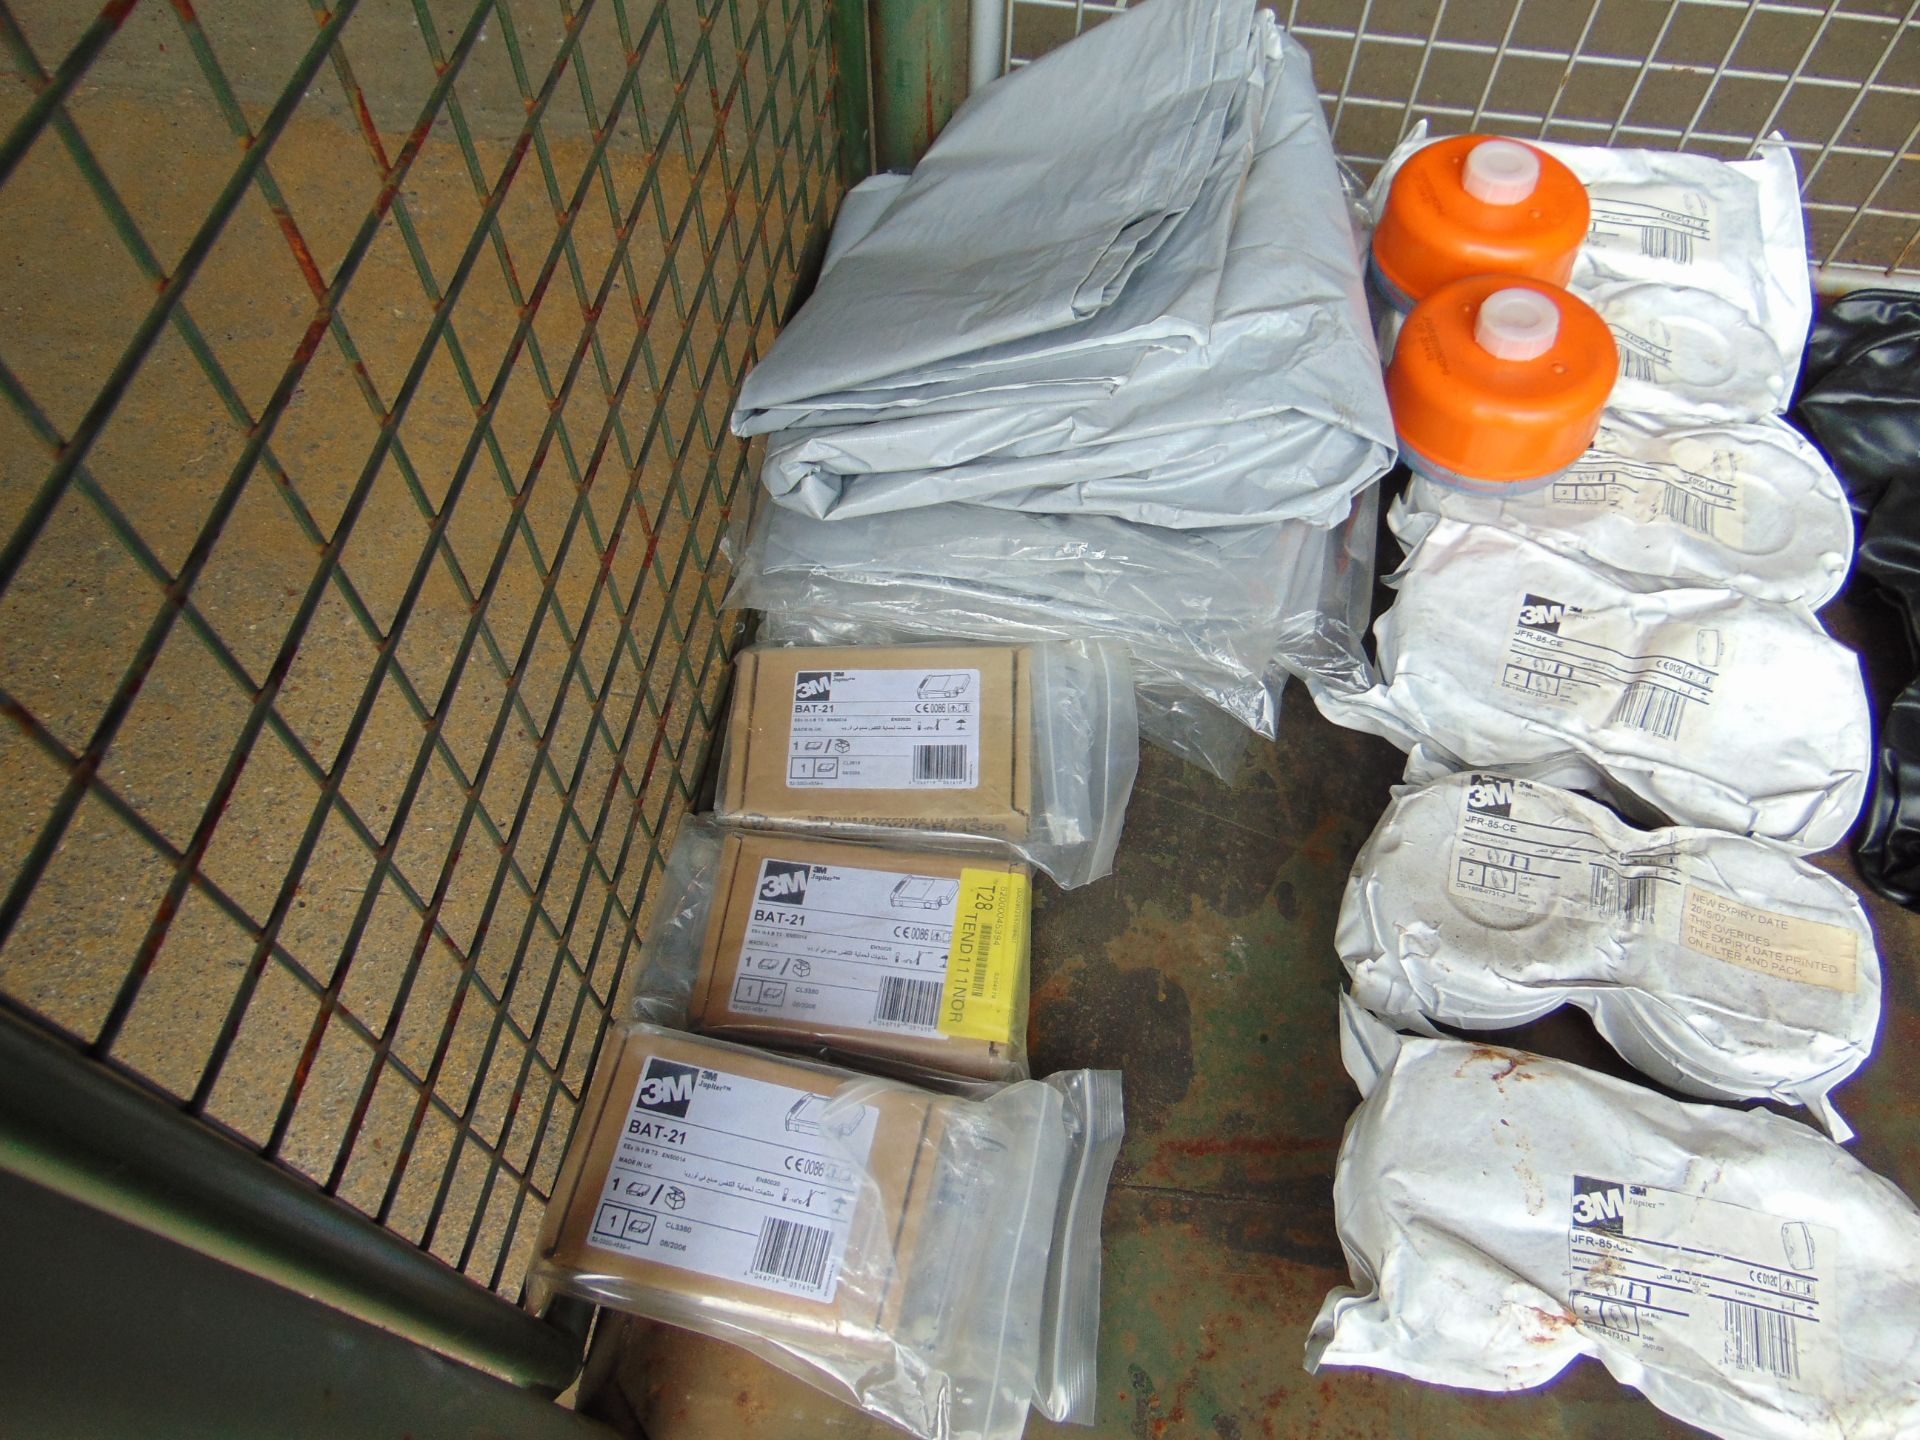 Stillage of 3M Filter Cartridges, Plastic Sheets, Camelback Personal Hydrator, HD Rubber Gloves etc. - Image 5 of 5